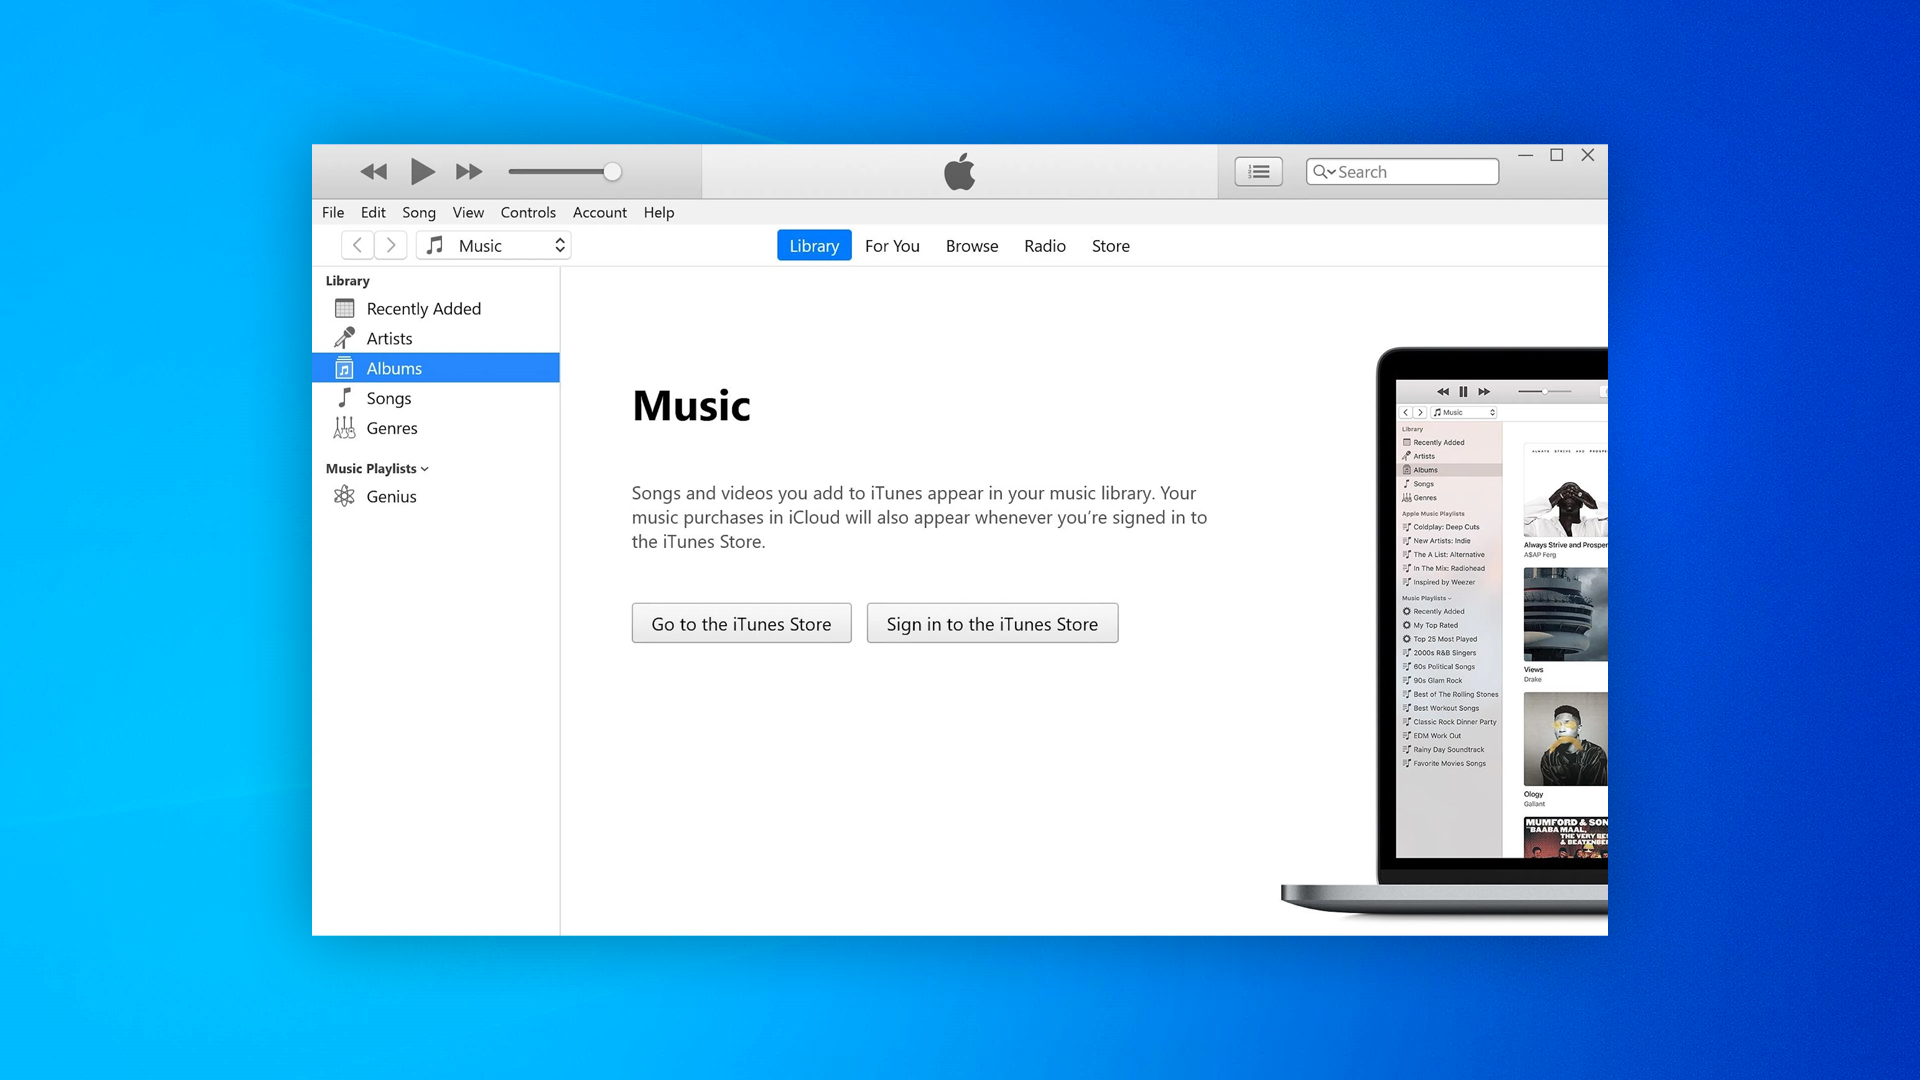 frivillig seng Gravere Comment: Apple needs to replace iTunes on Windows - 9to5Mac